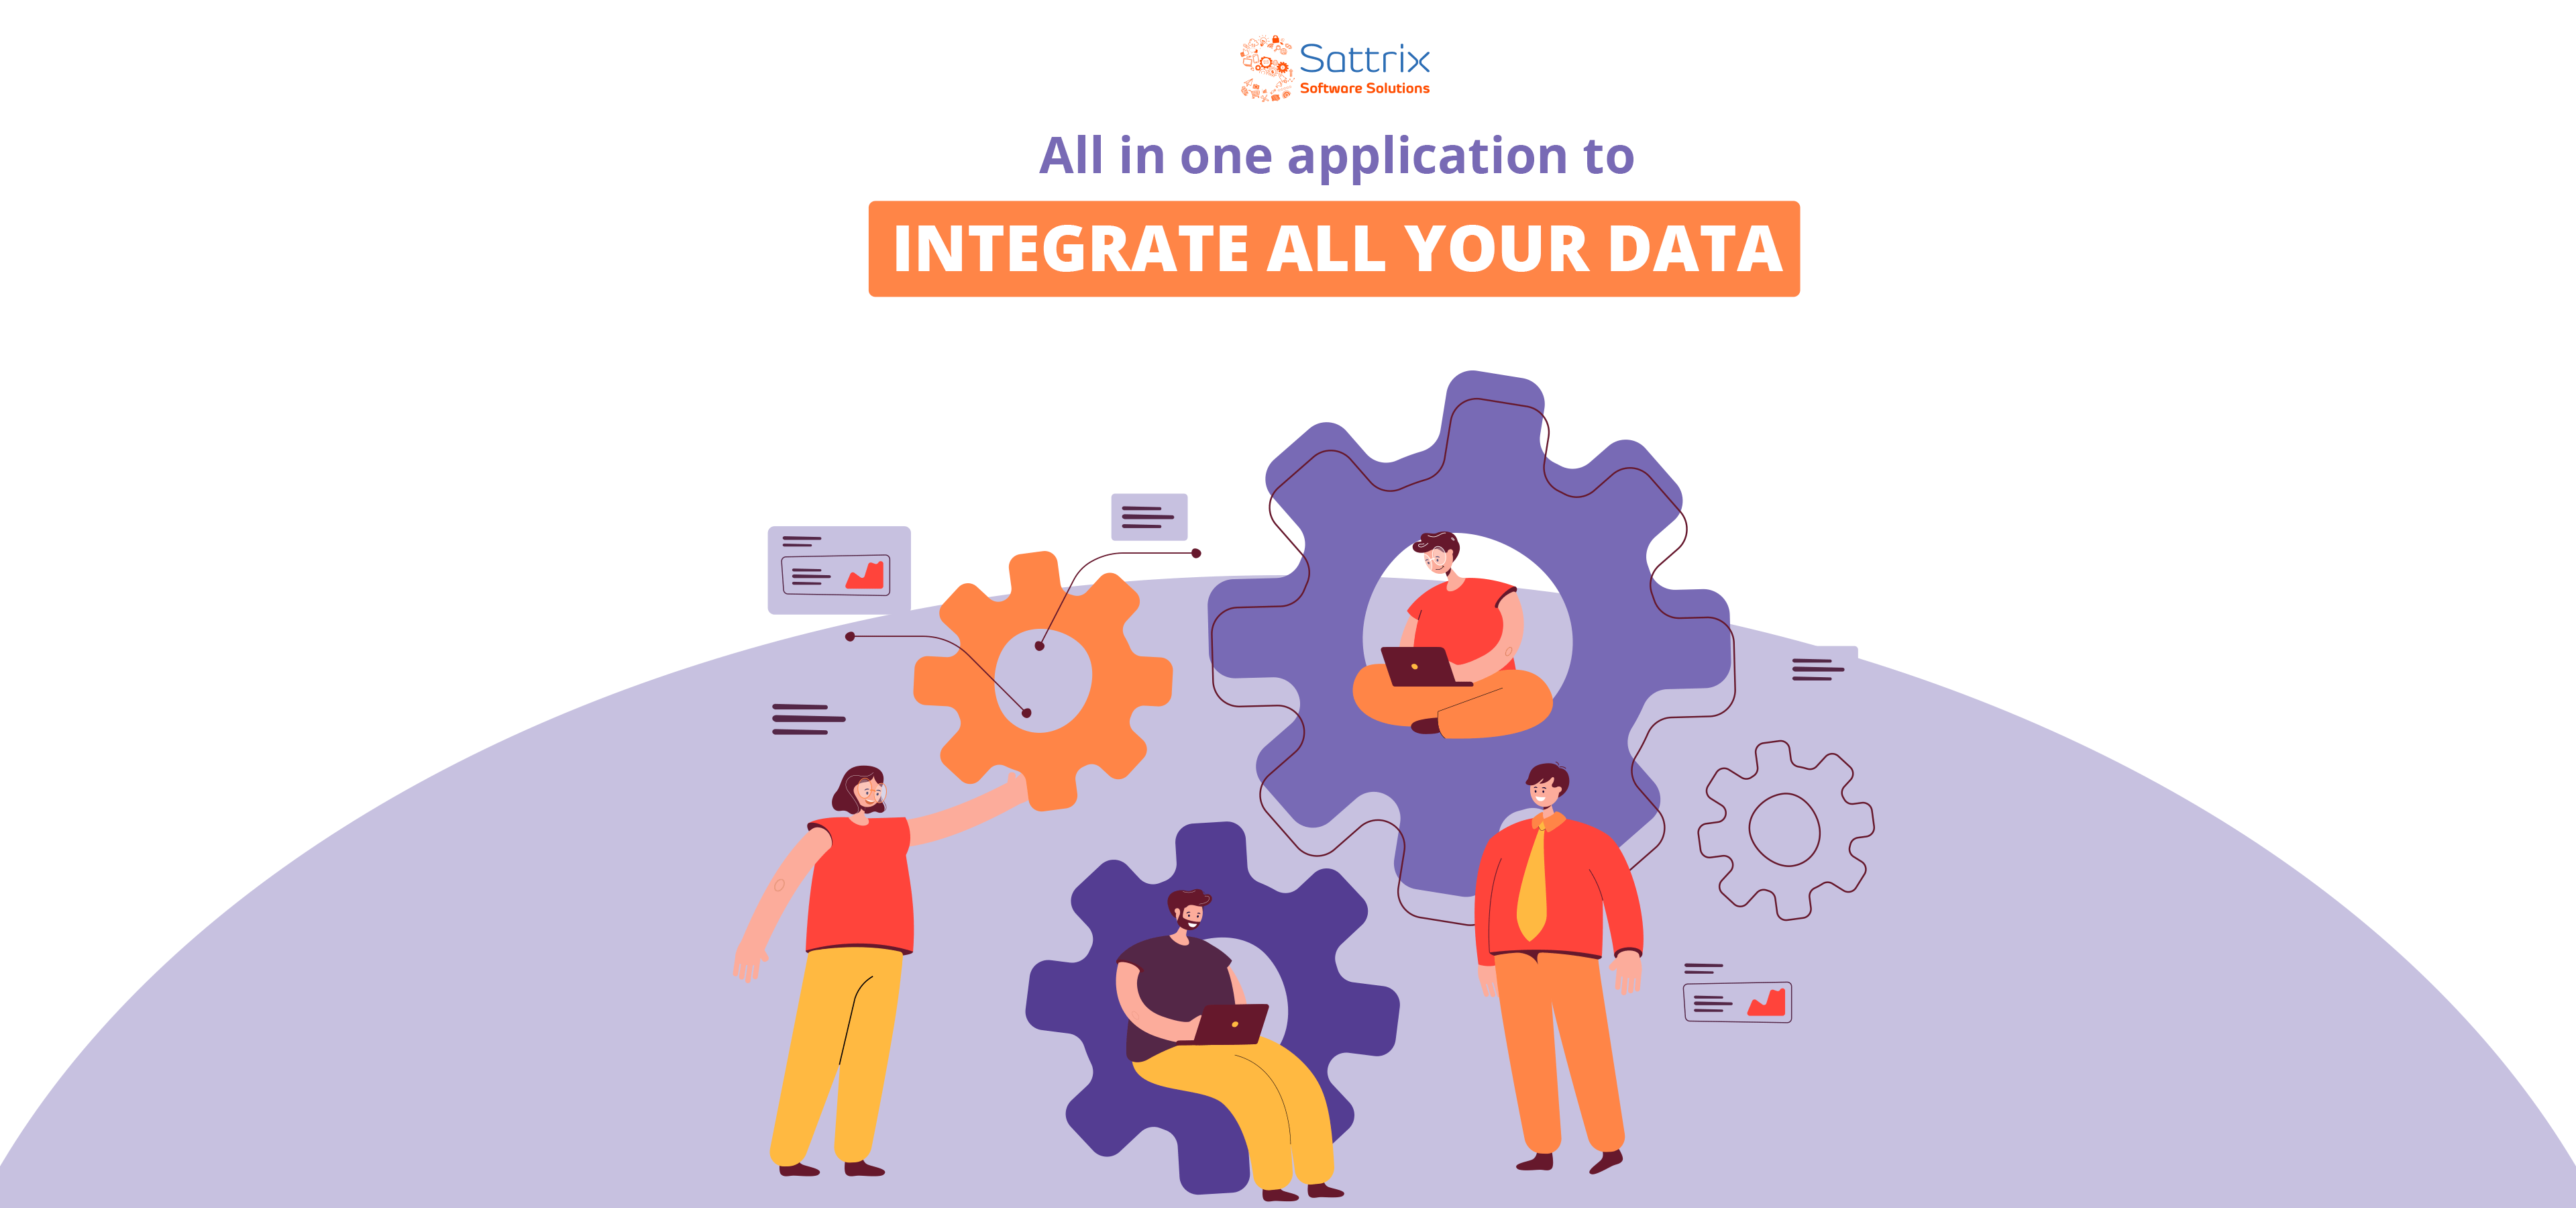 All in one application to integrate all your data